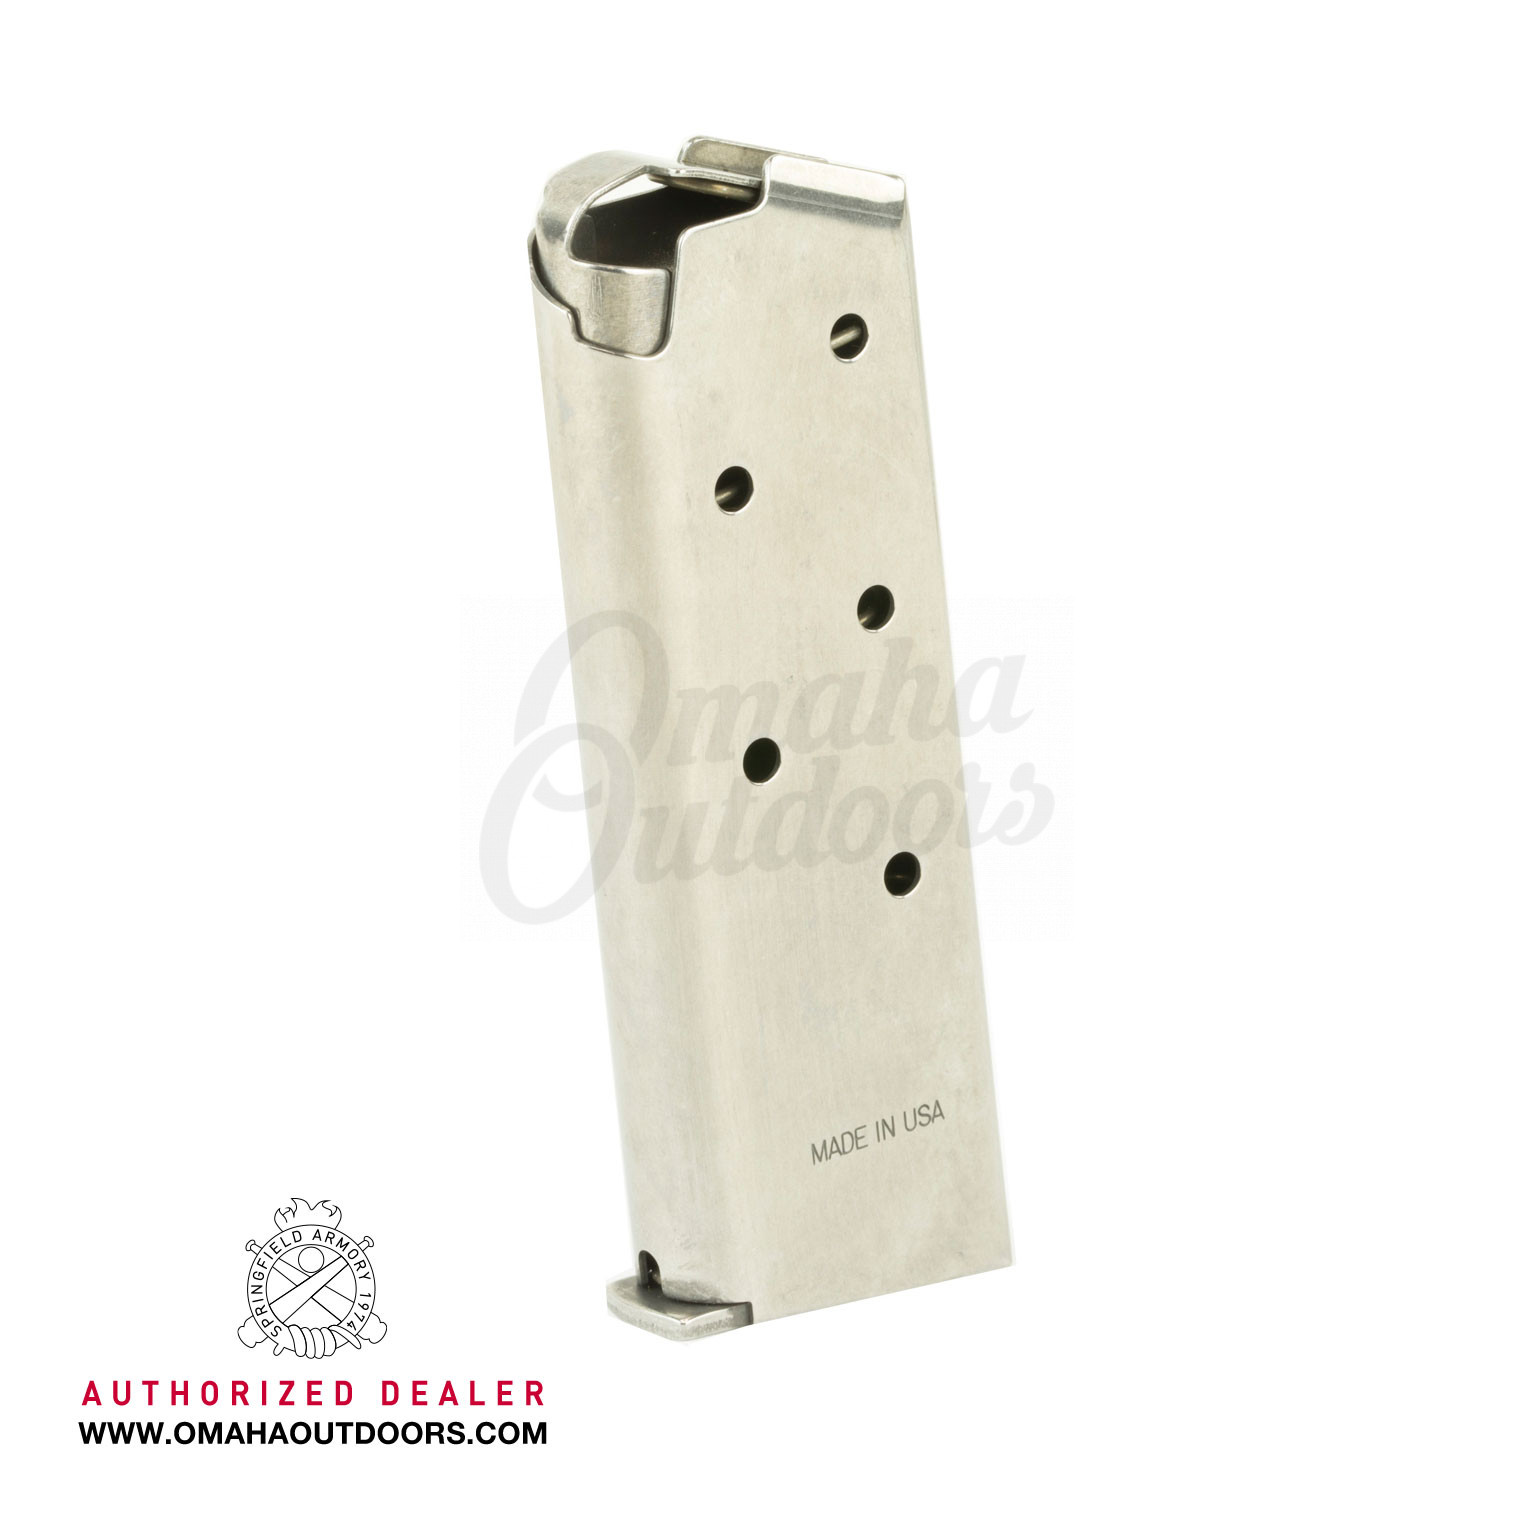 Springfield Armory SPR PG6807 911 380 ACP 7 Round Magazine for sale online 